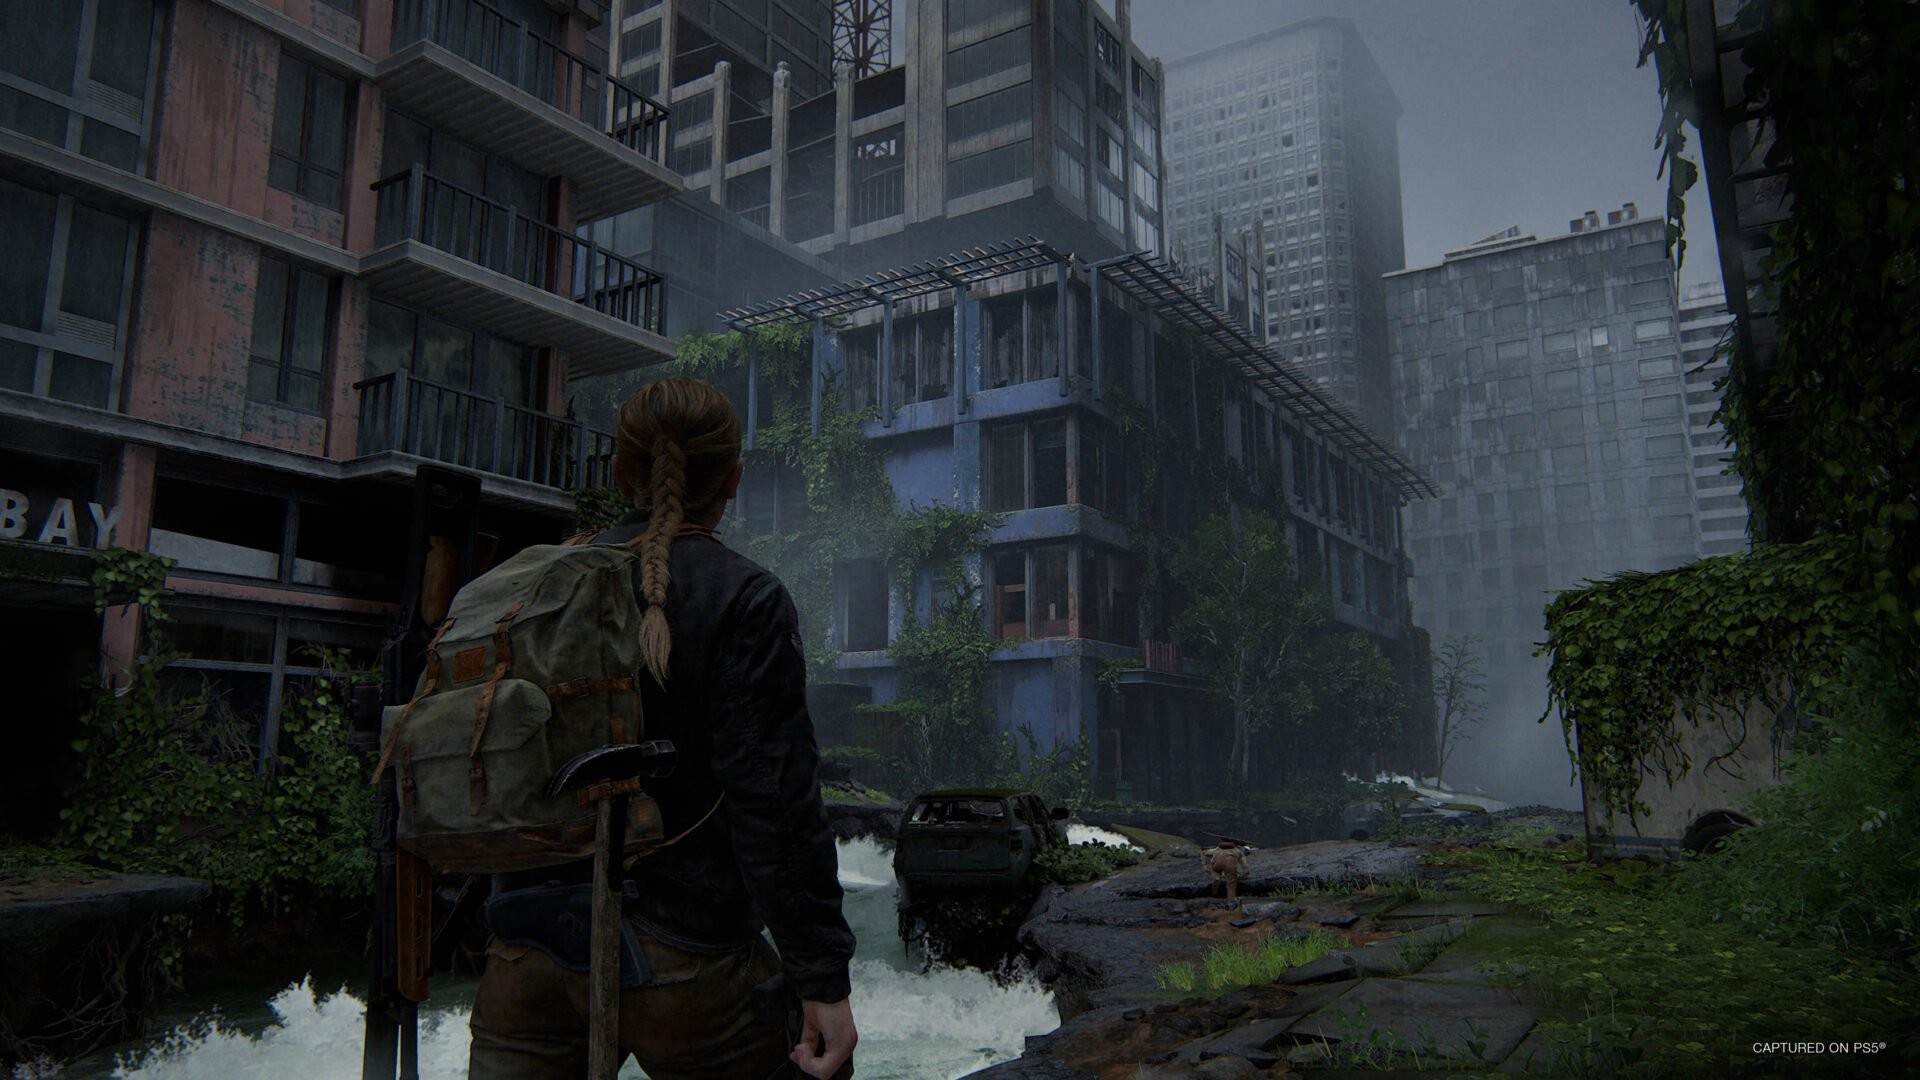 The Last of Us Part II Remastered for PlayStation 5